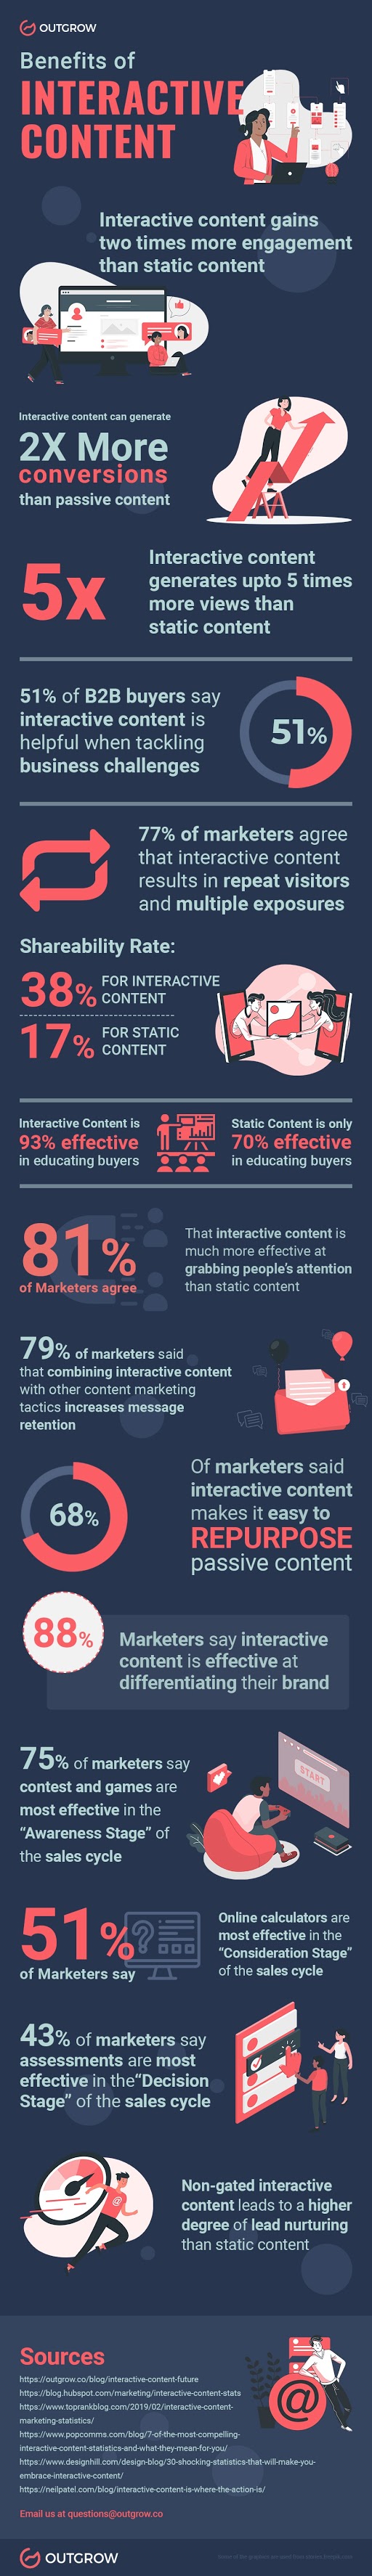 Statistics on Interactive Content: Trends and Best Practices [Infographic]